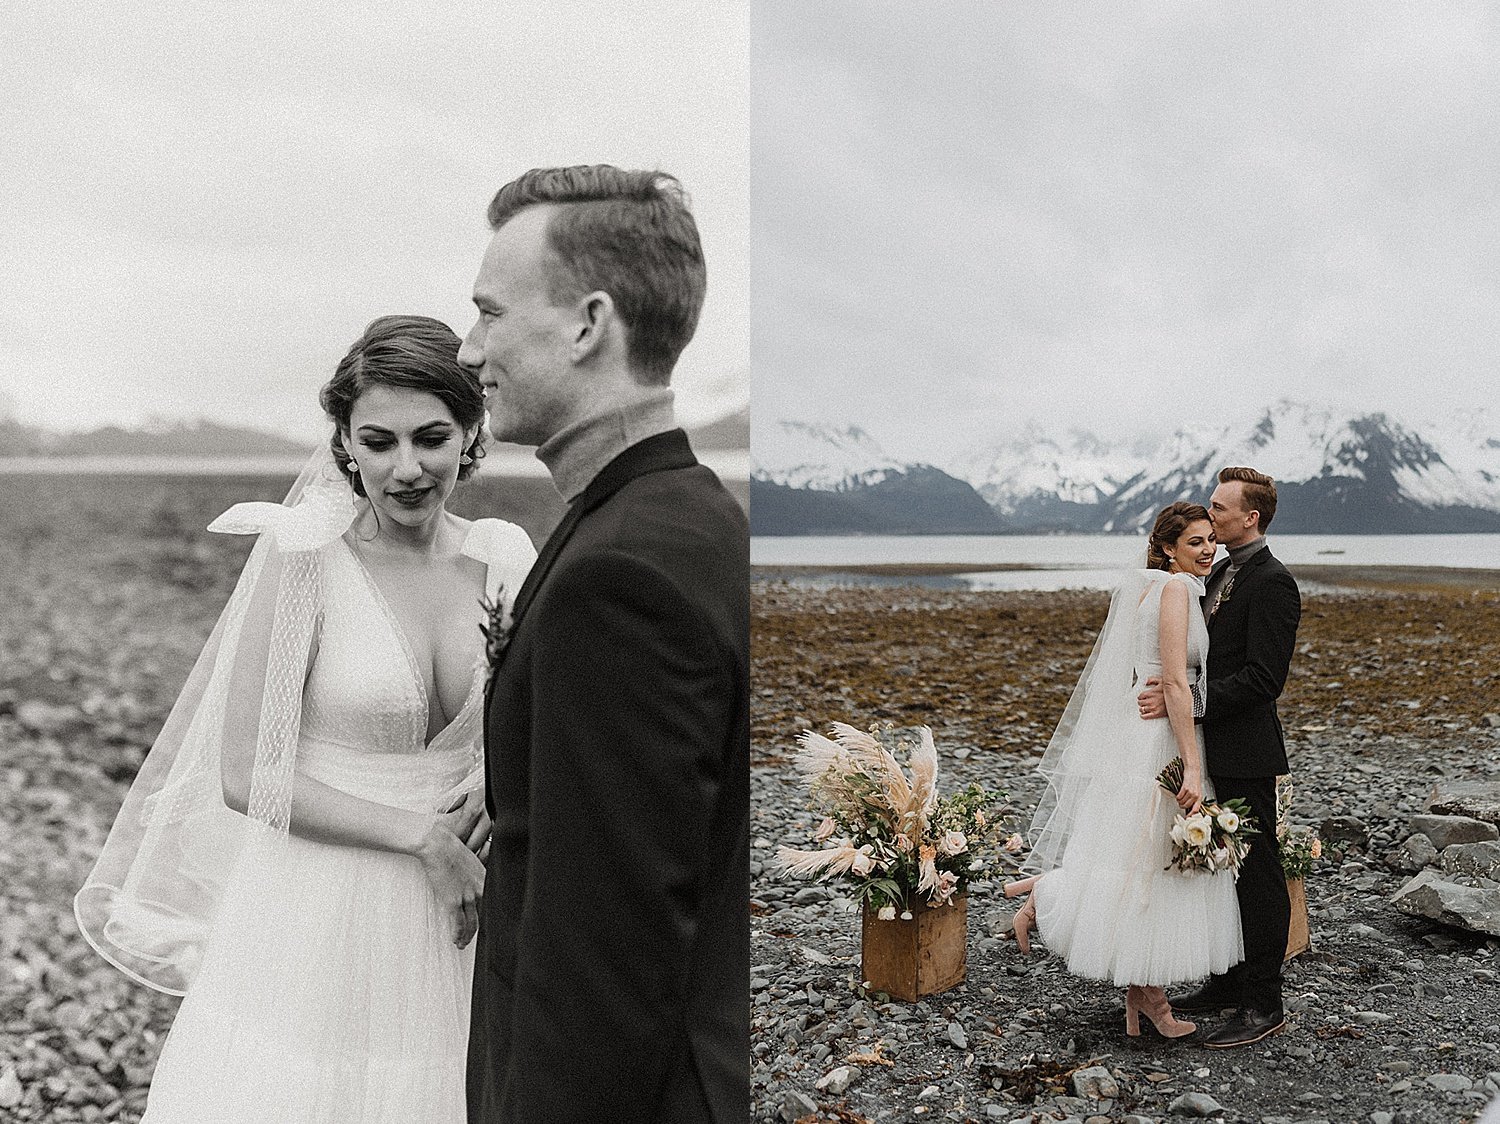  Bride and groom standing in front of mountains in vintage inspired shoot 